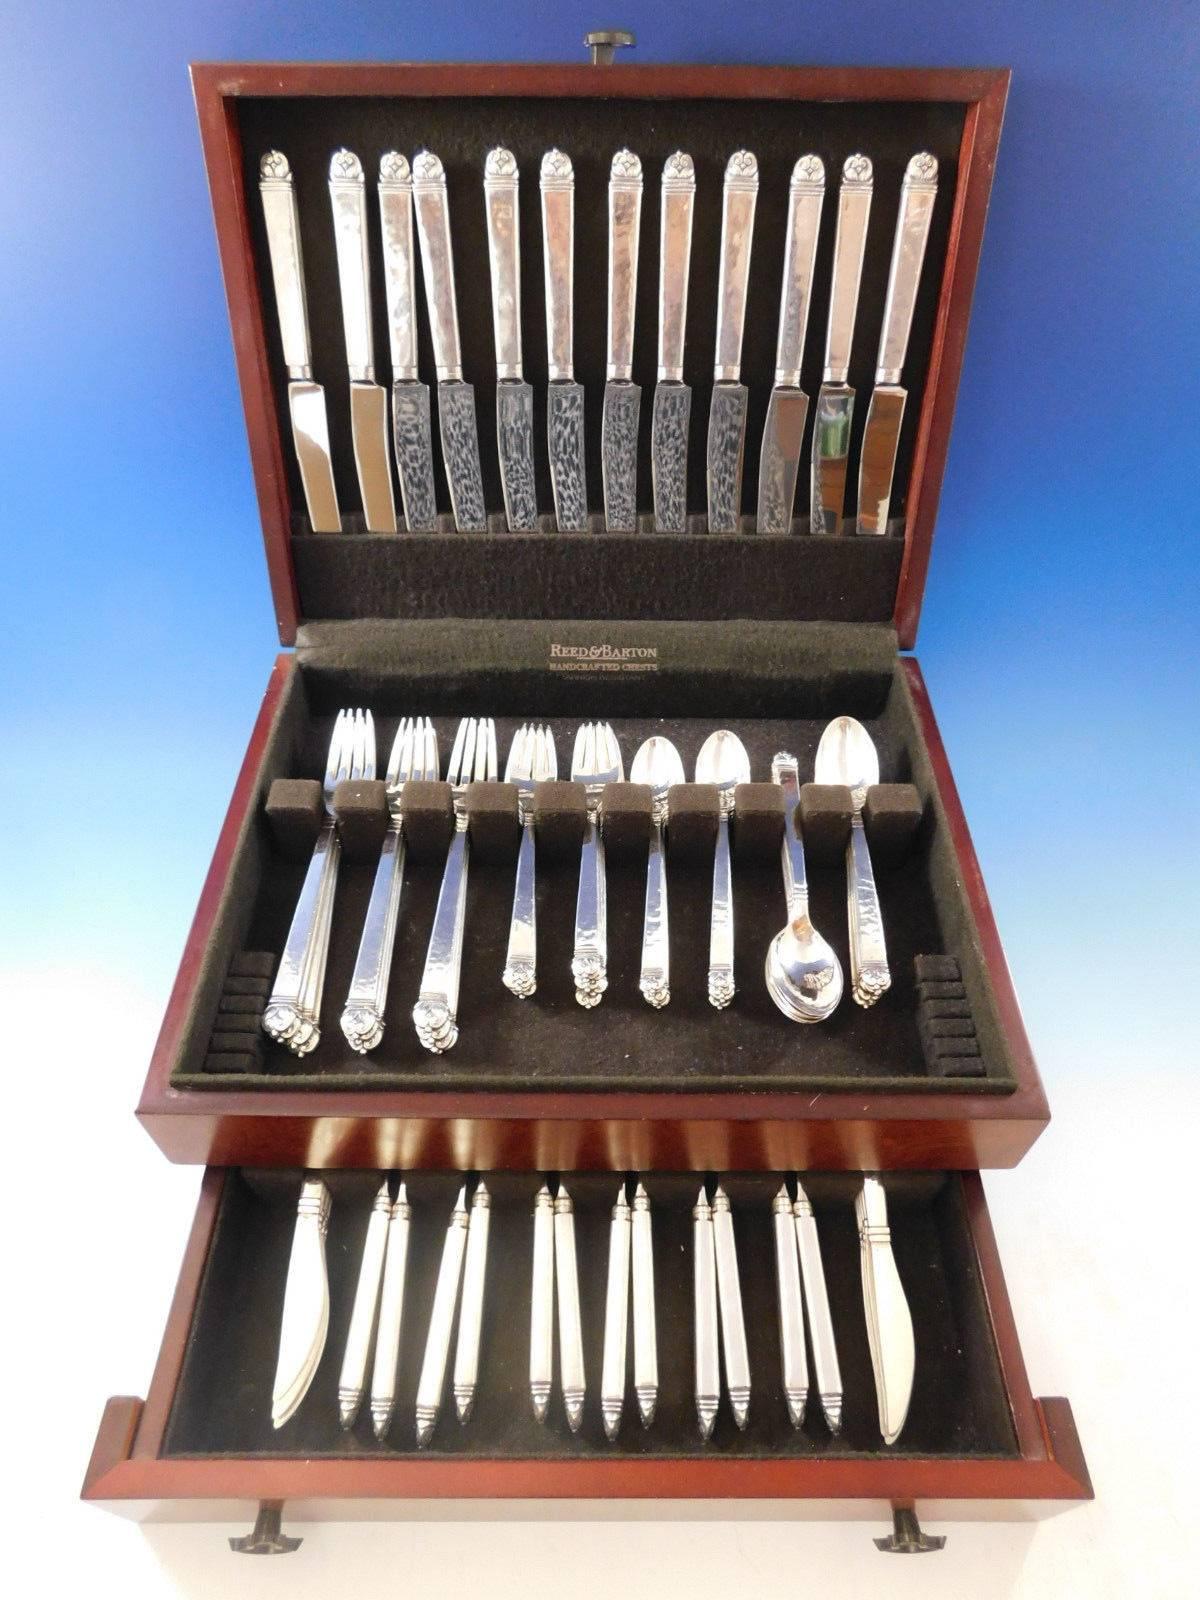 A rare and exceptional hand wrought Peer Smed Danish Sterling silver Flatware set with subtle hand hammered finish, 82 pieces. This set includes:

12 Dinner Size Knives, 9 3/4